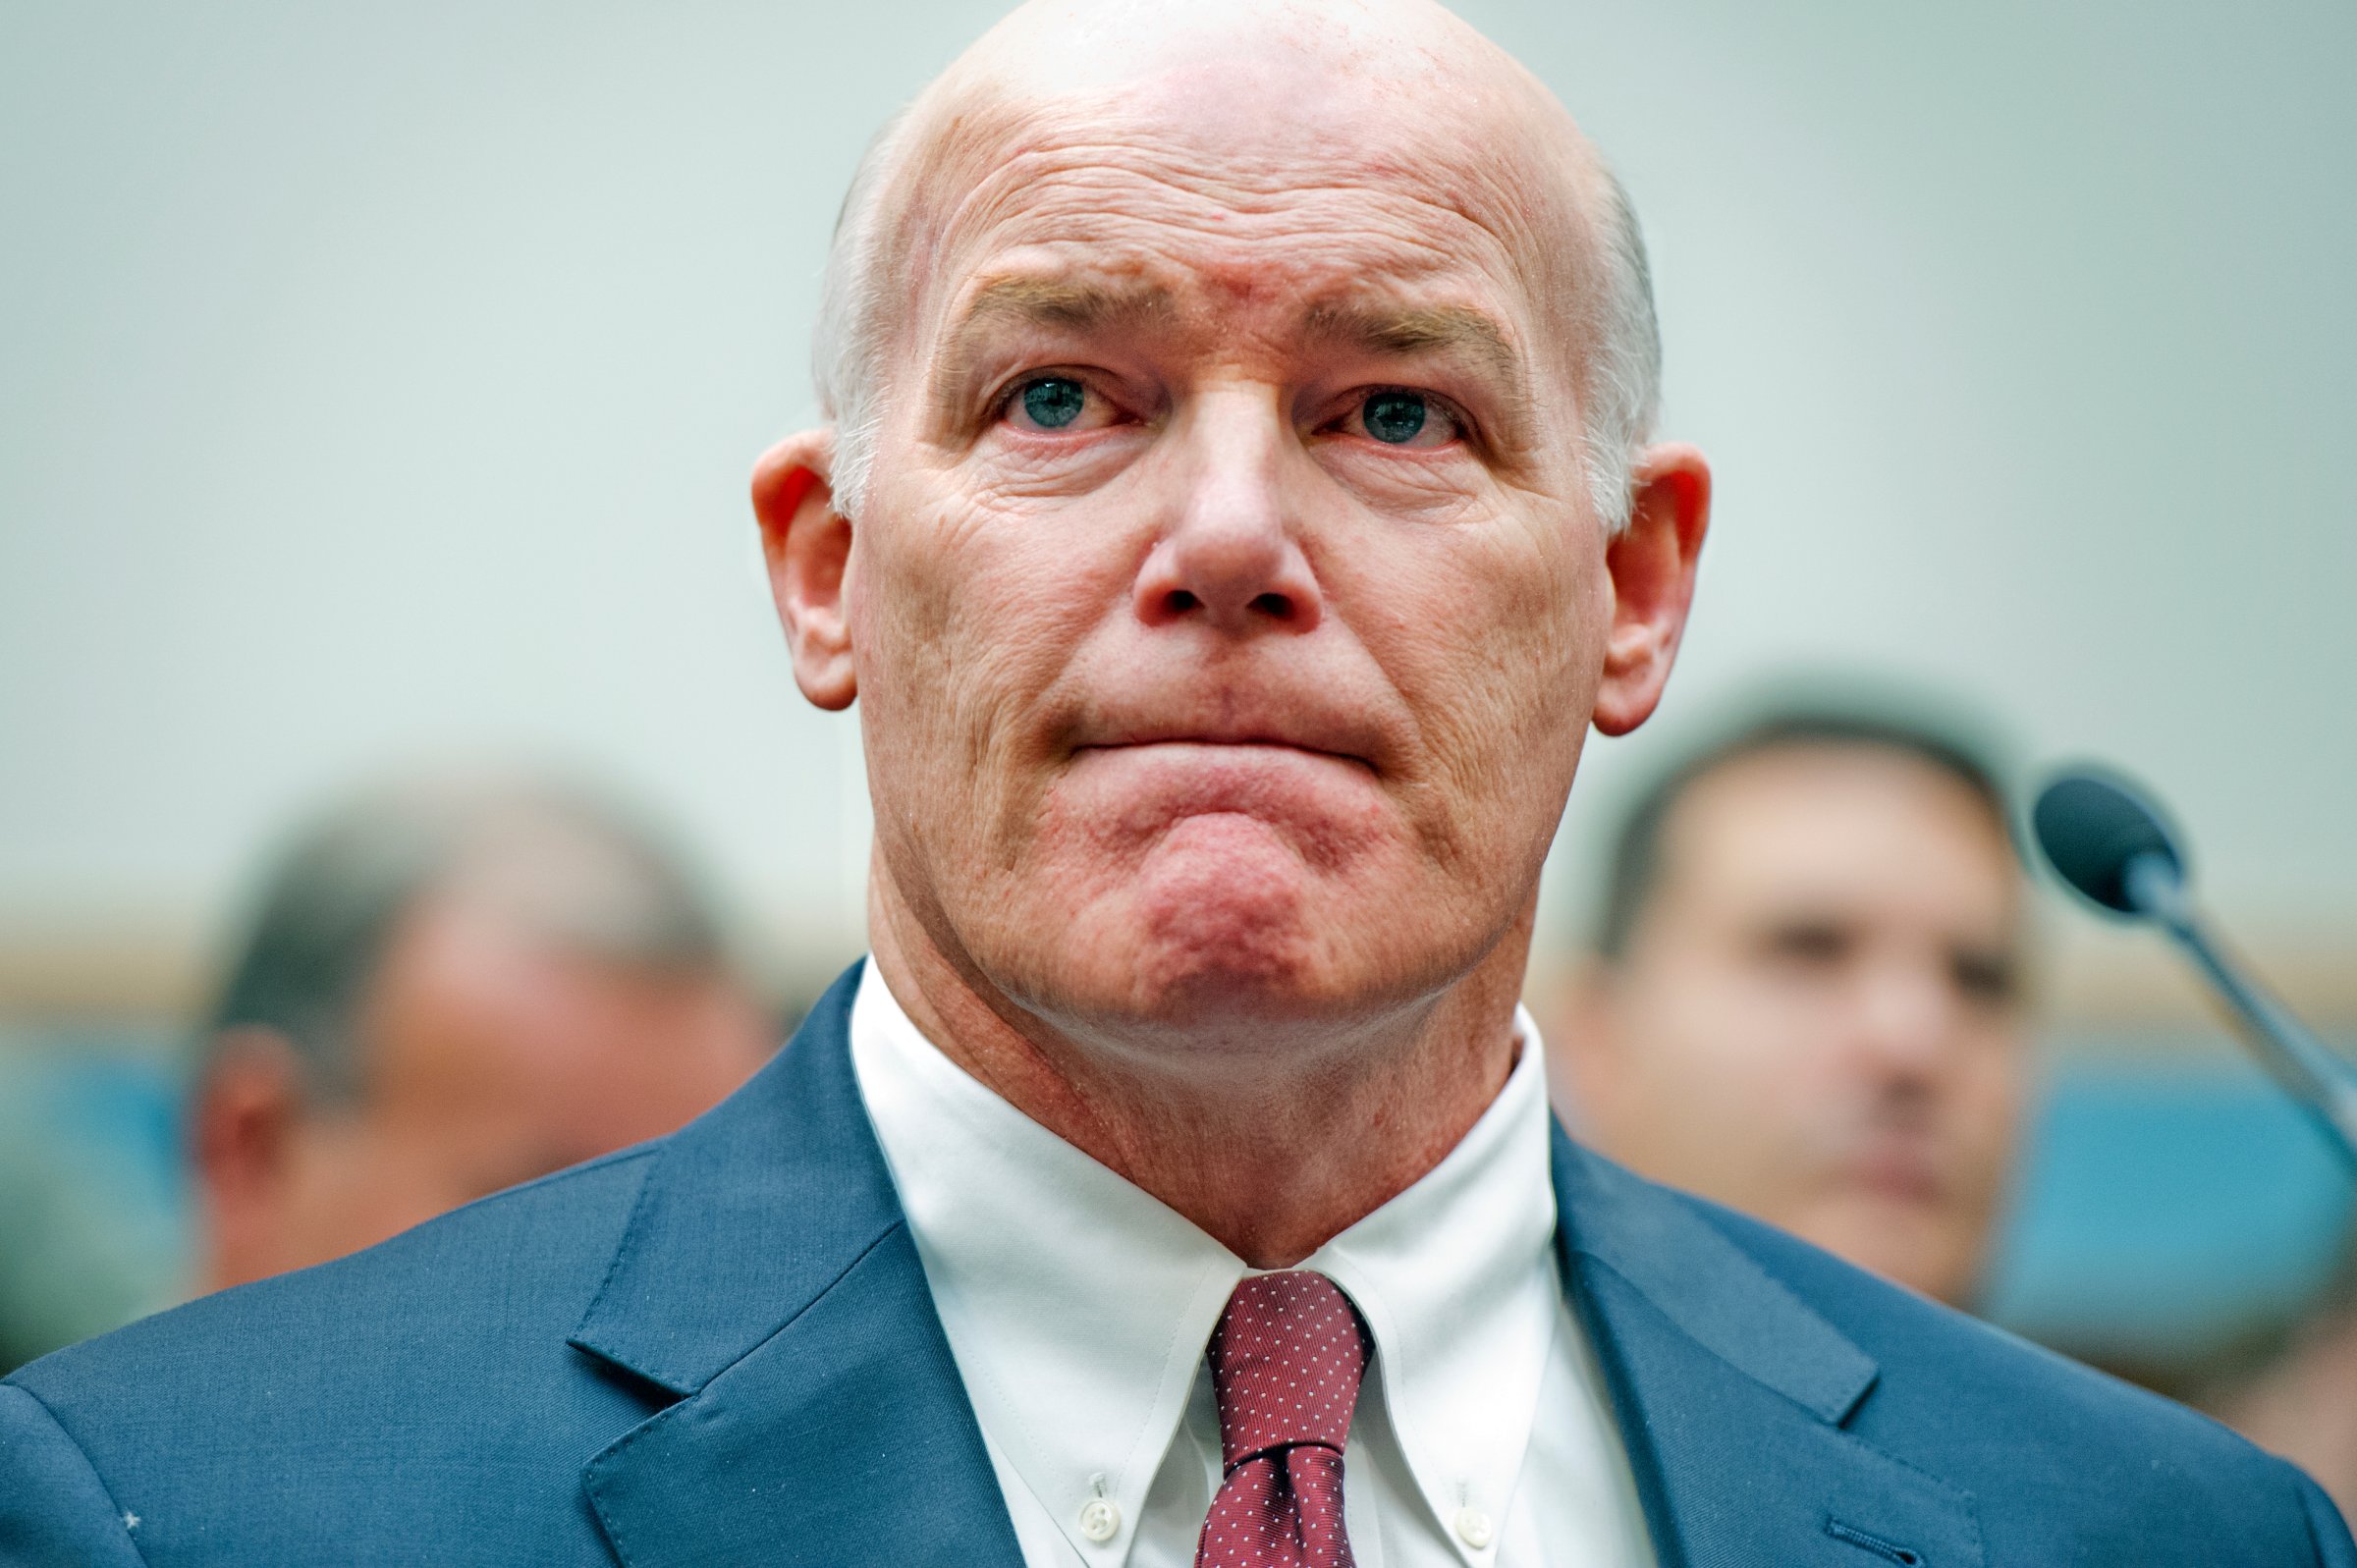 Acting Secret Service Director Joseph Clancy prepares to testify before a House Judiciary Committee hearing on Nov. 19, 2014